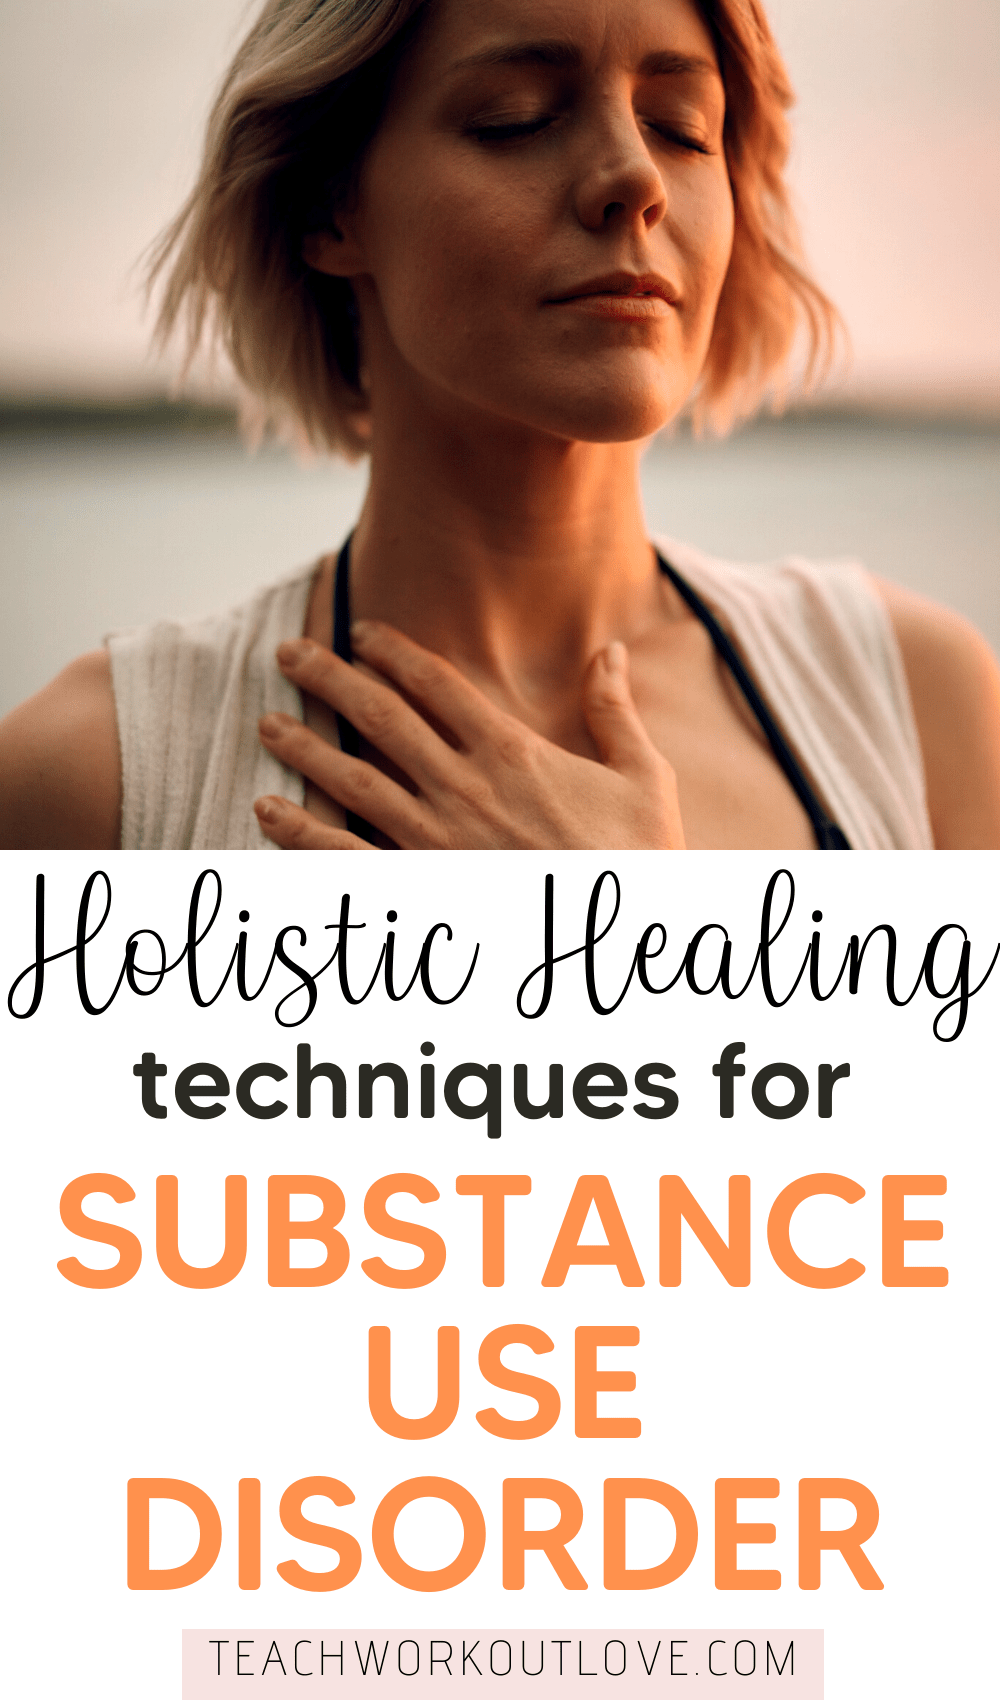 Let’s take a closer look at what “holistic” means and how it can play out for someone entering recovery when dealing with substance use disorder.